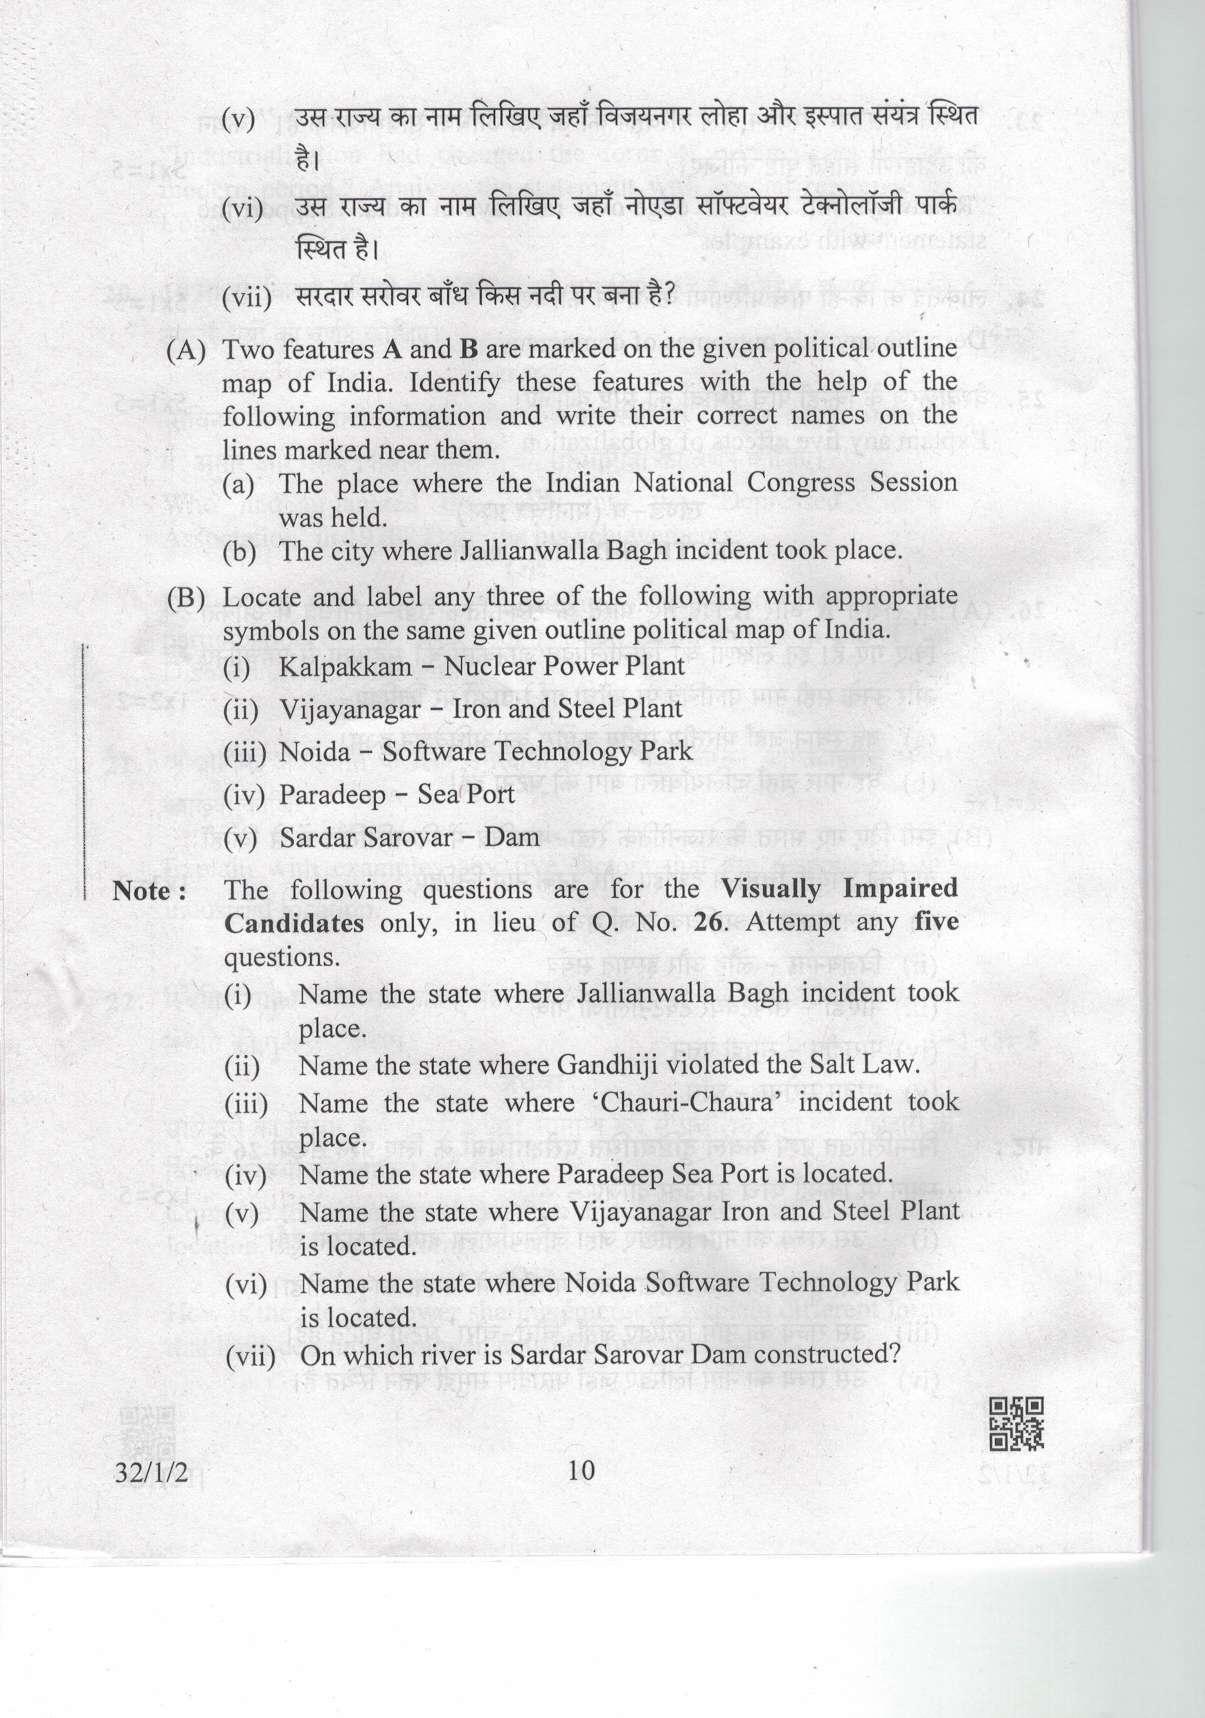 CBSE Class 10 32-1-2 Social Science 2019 Question Paper - Page 10